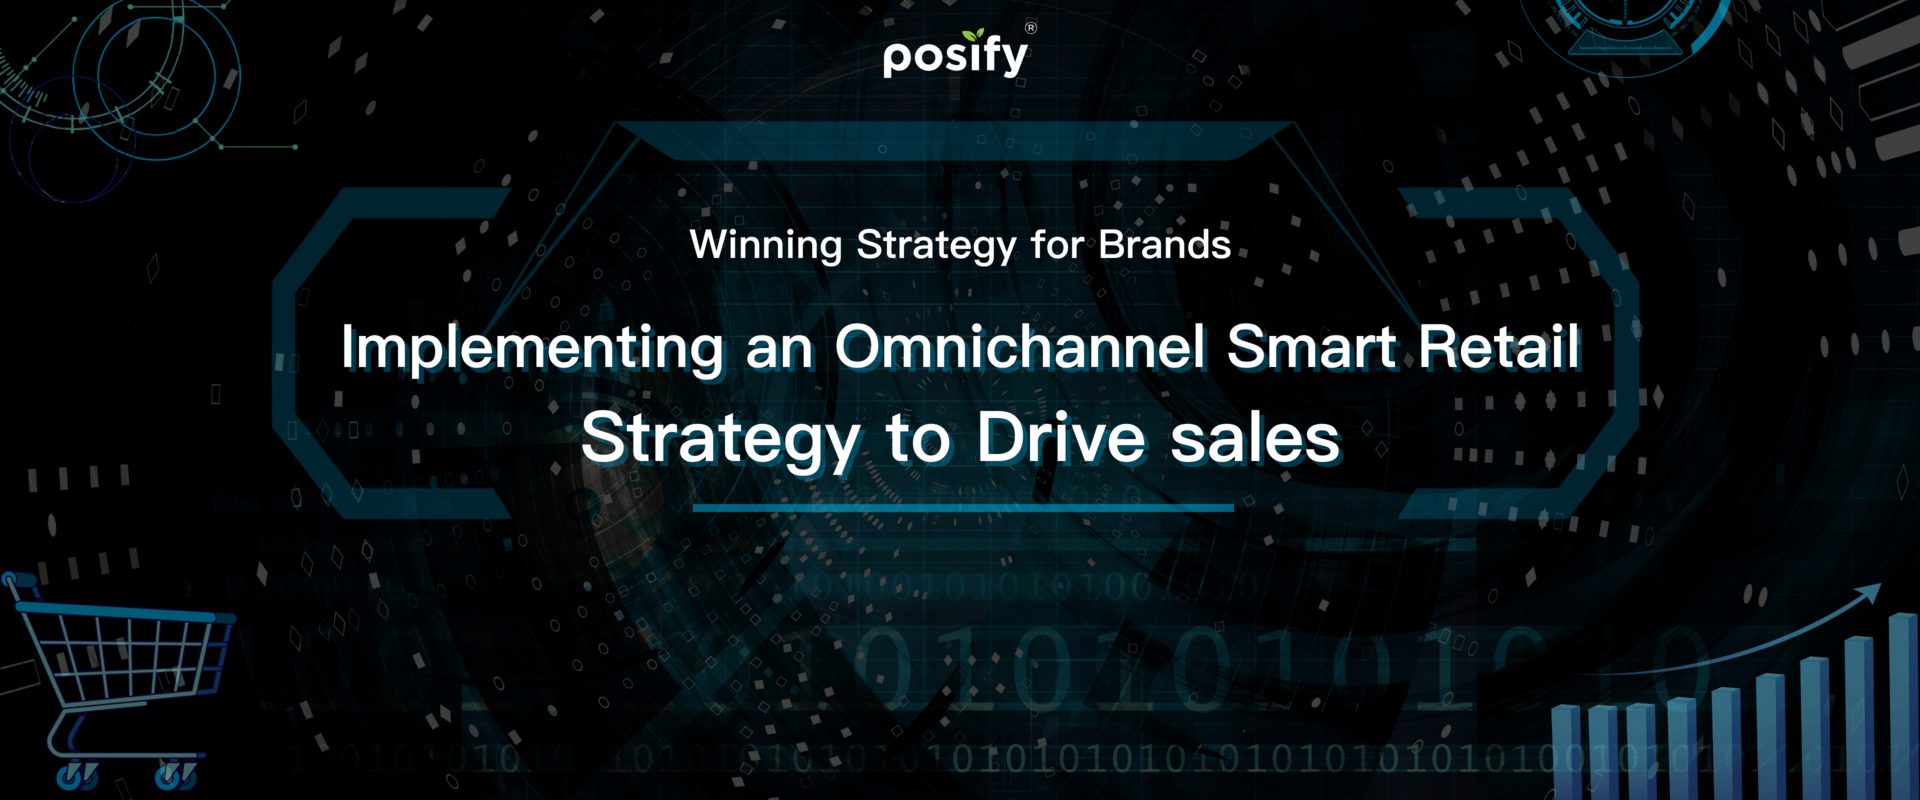 Winning Strategy for Brands: Implementing an Omnichannel Smart Retail Strategy to Drive sales